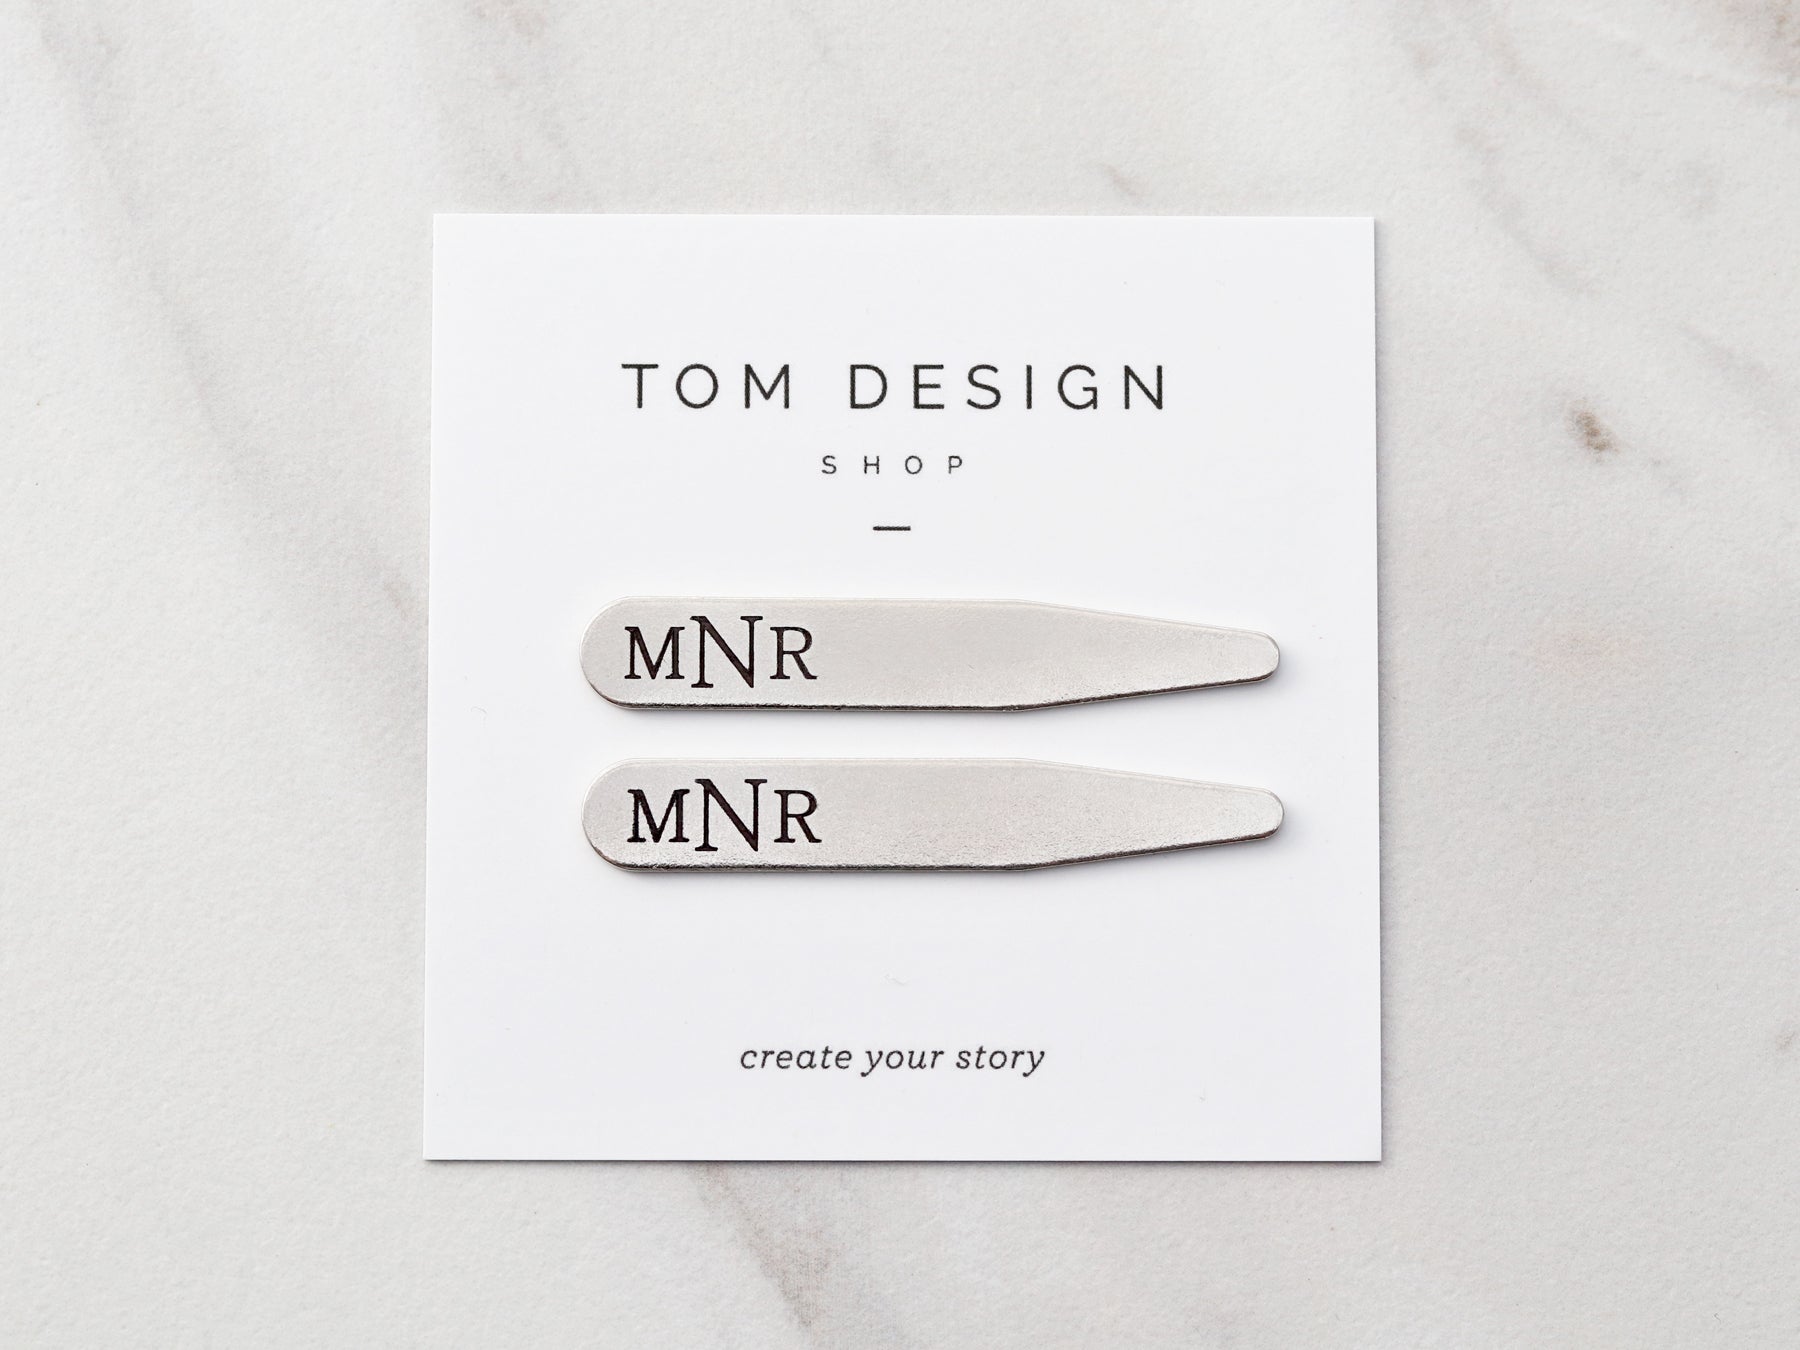 magnetic collar stays, personalized collar stays